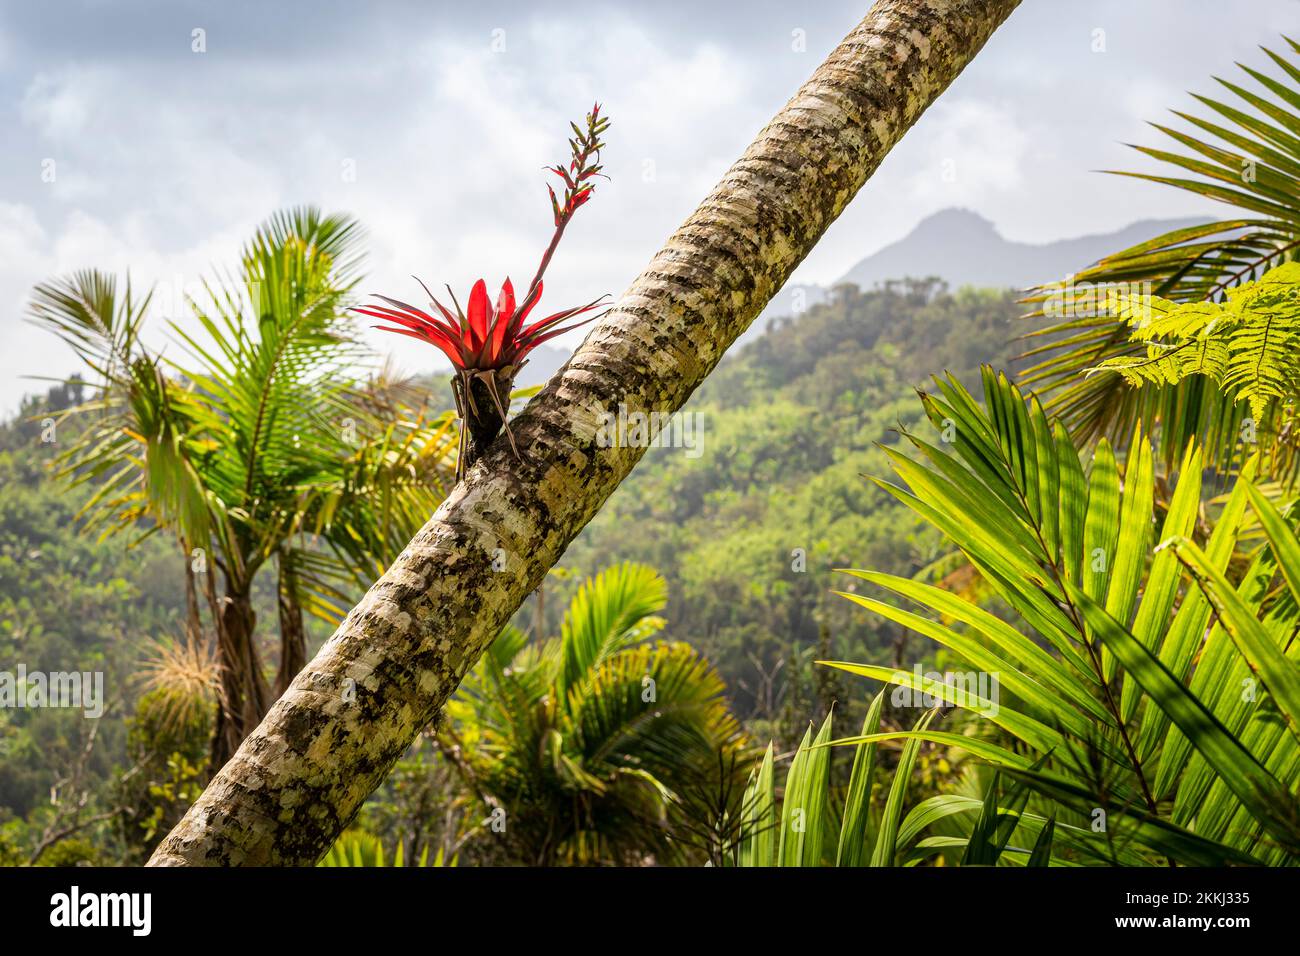 A Red Bromeliad flowers in El Yunque Rainforest National Park, on the tropical Caribbean island of Puerto Rico, USA. Stock Photo